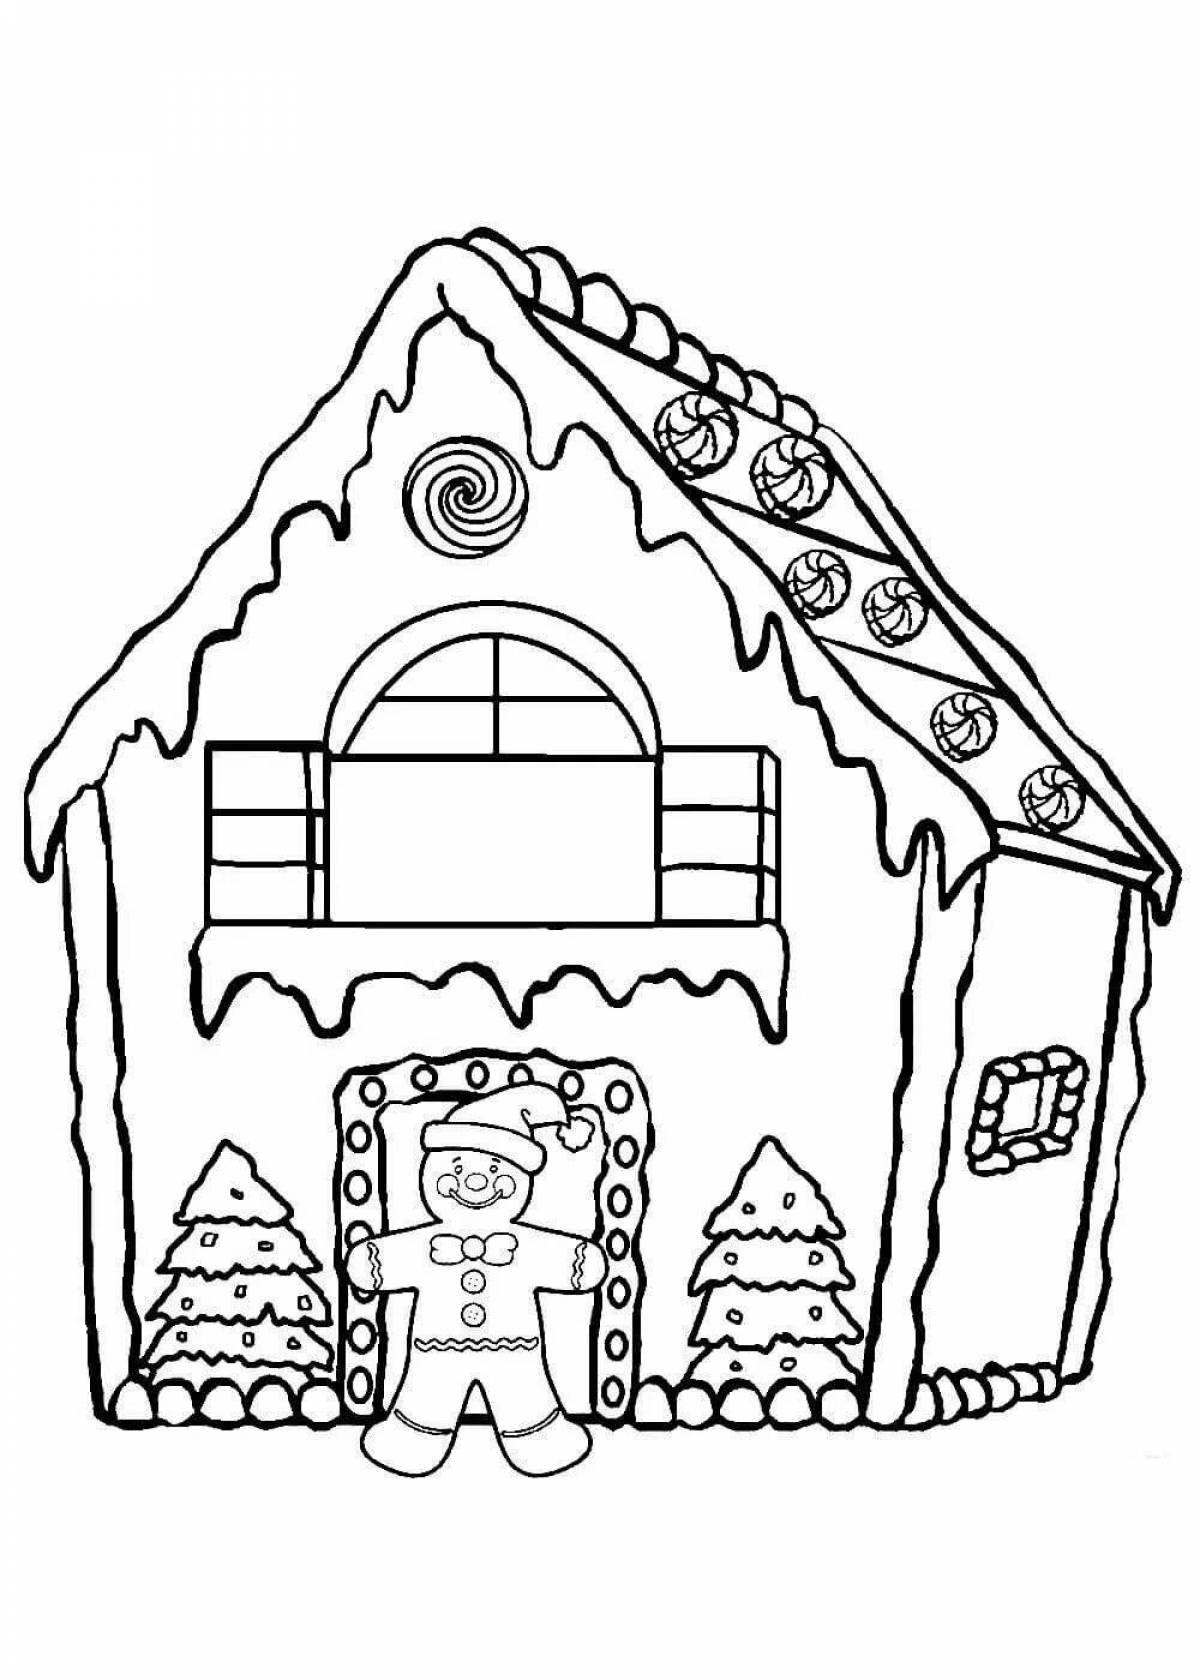 Sweet house coloring book